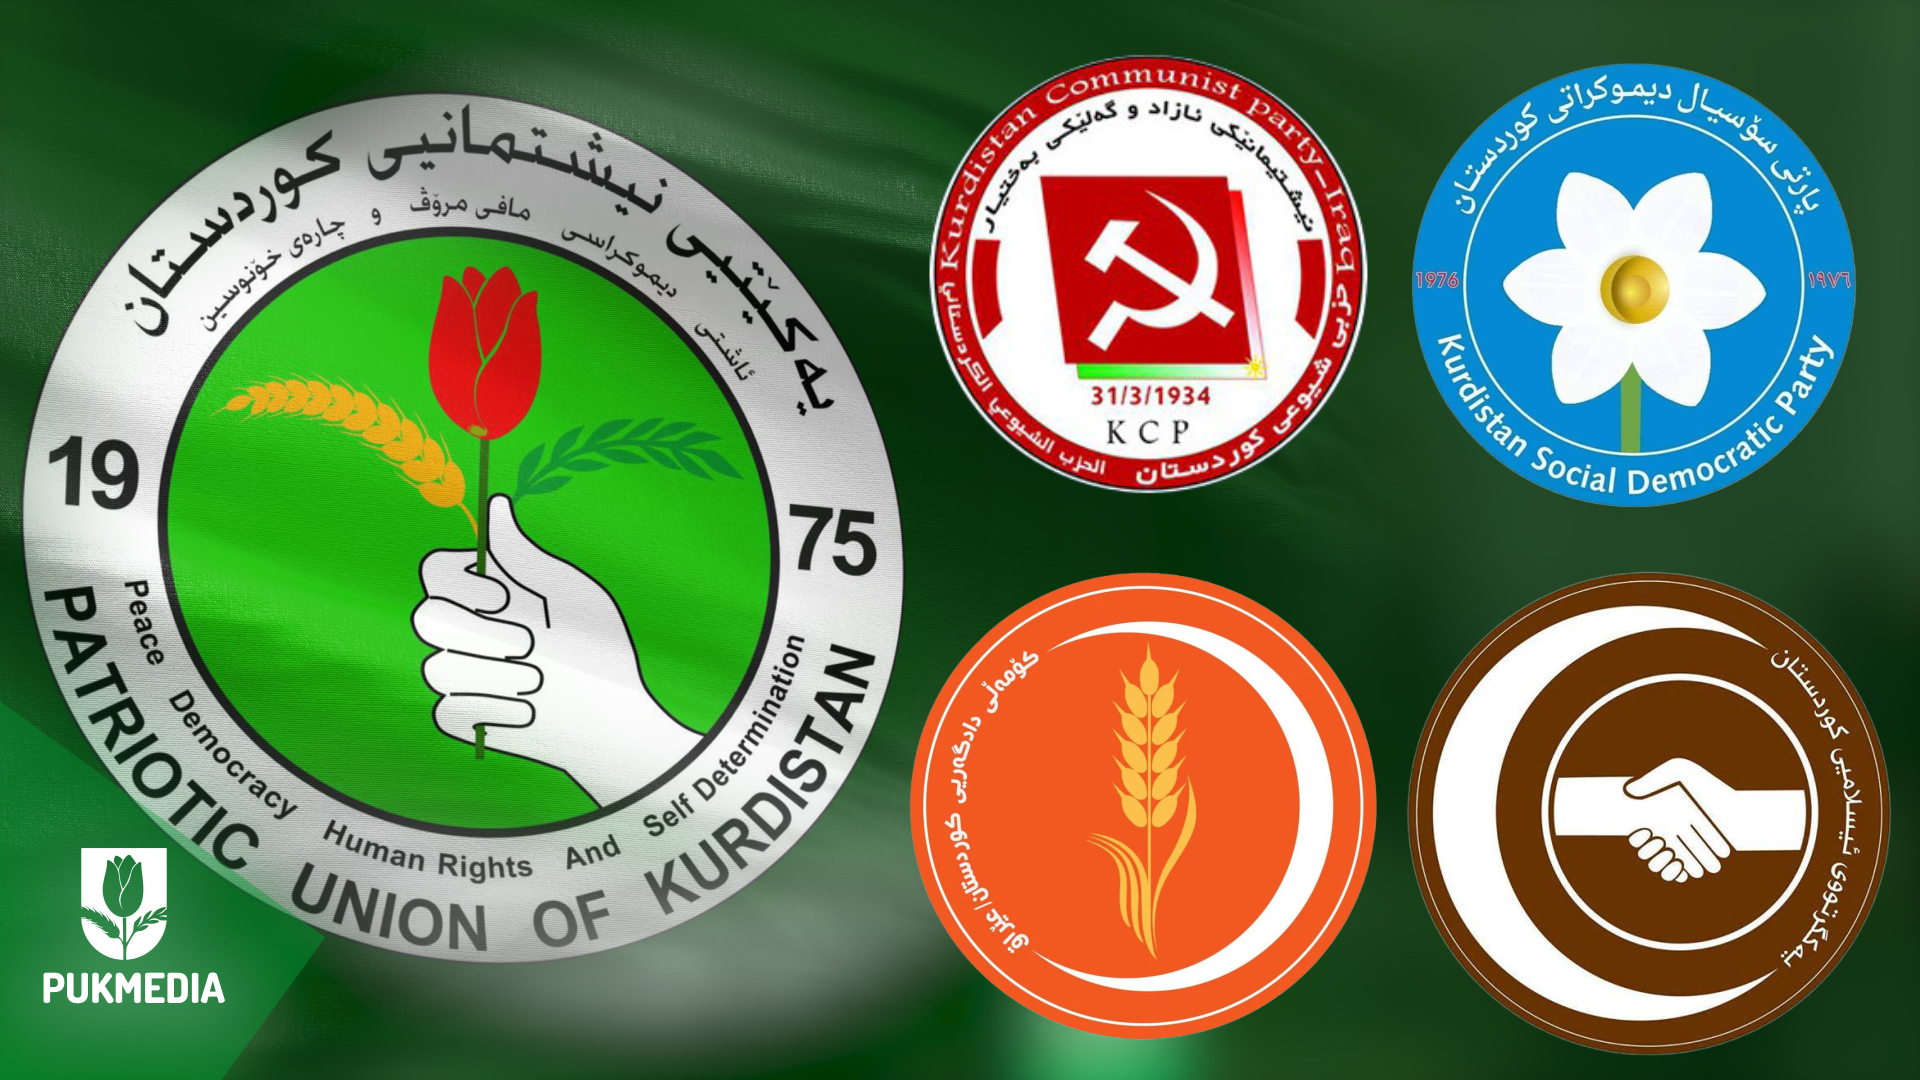 The logo of PUK and other Kurdish Parties